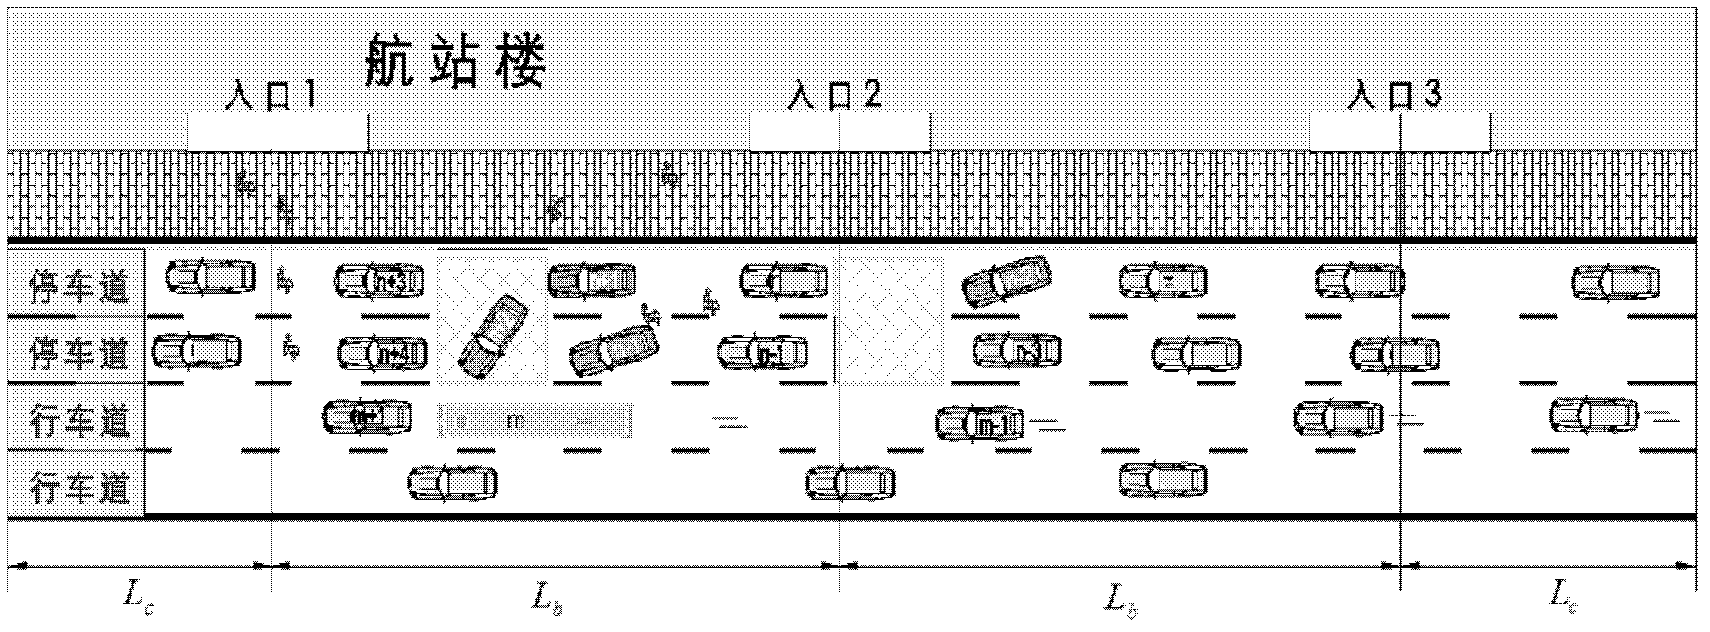 Method for optimizing setting position and number of horizontal passageway on lane side